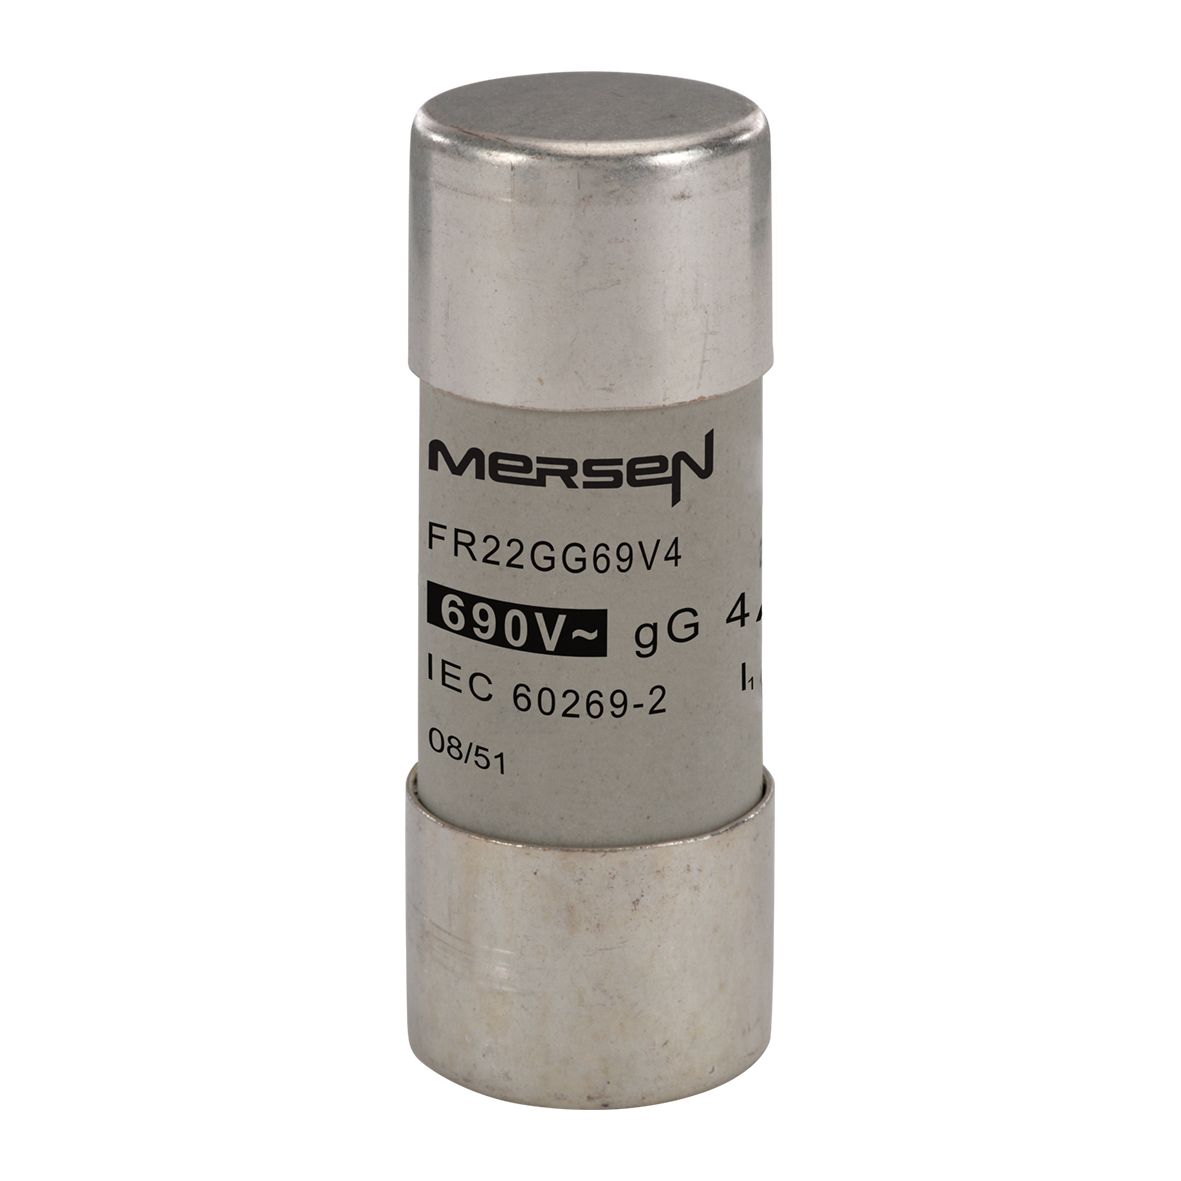 H219772 - Cylindrical fuse-link gG 690VAC 22.2x58, 4A